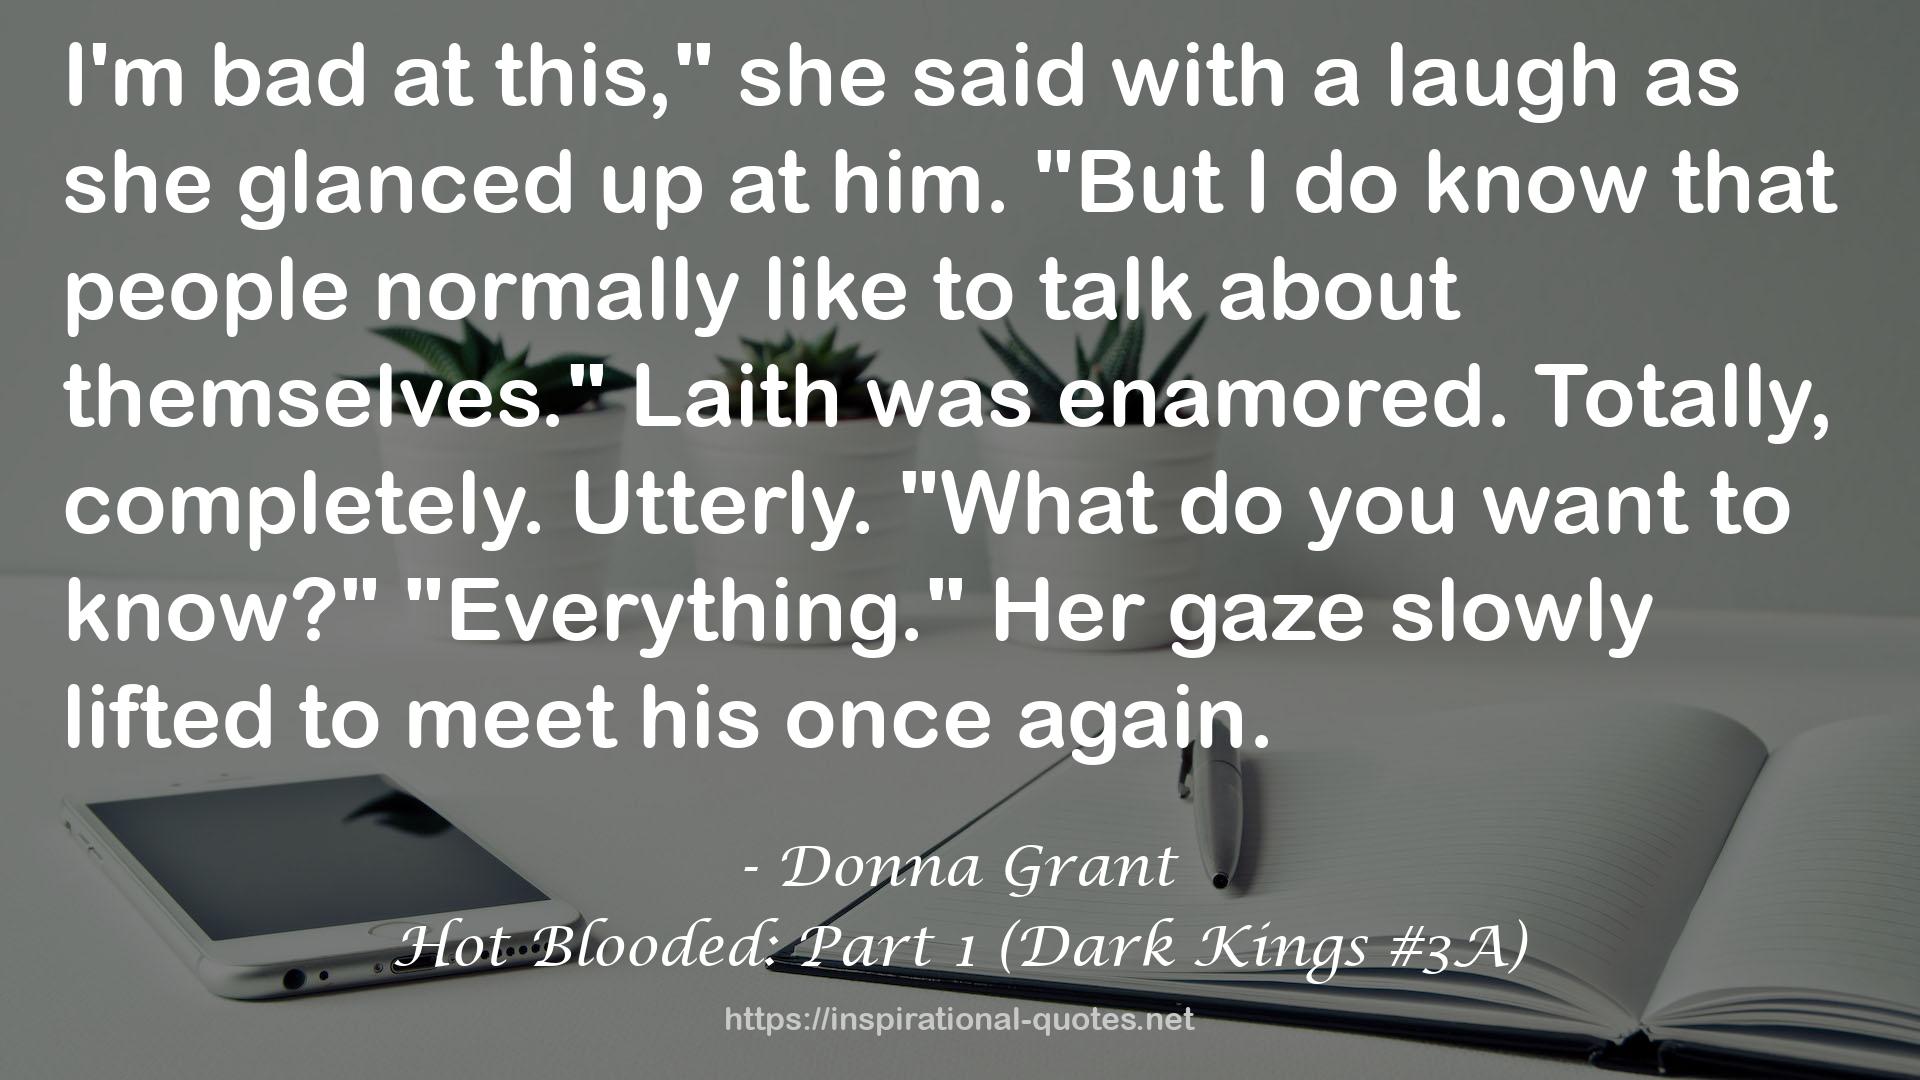 Hot Blooded: Part 1 (Dark Kings #3A) QUOTES